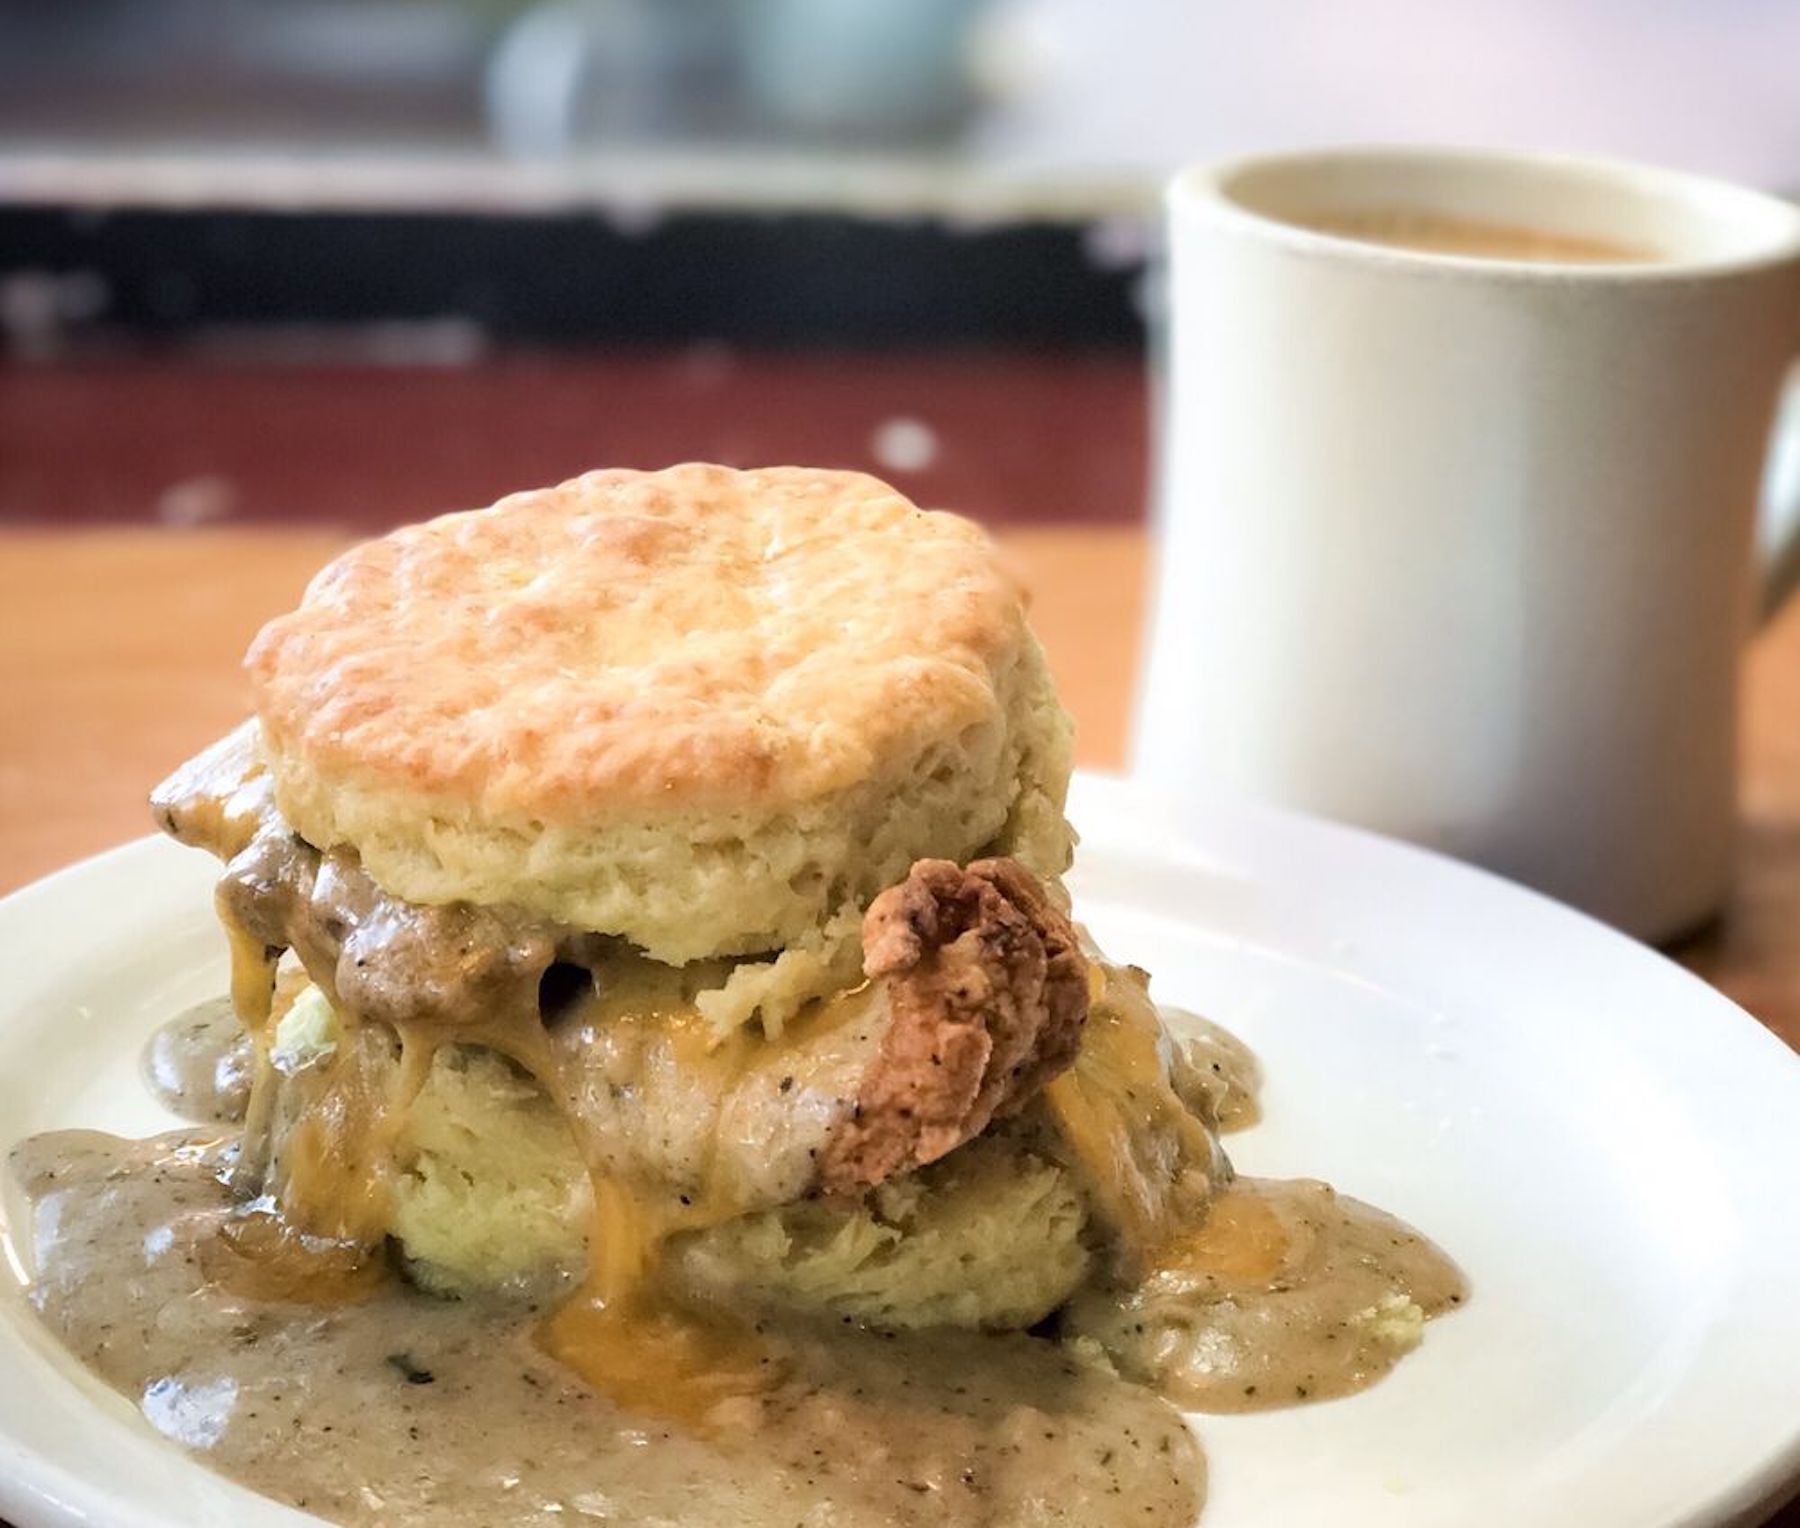 Item menu The Reggie from Pine State Biscuits, a fresh biscuit covered in gravy with a cup of coffee in the background.